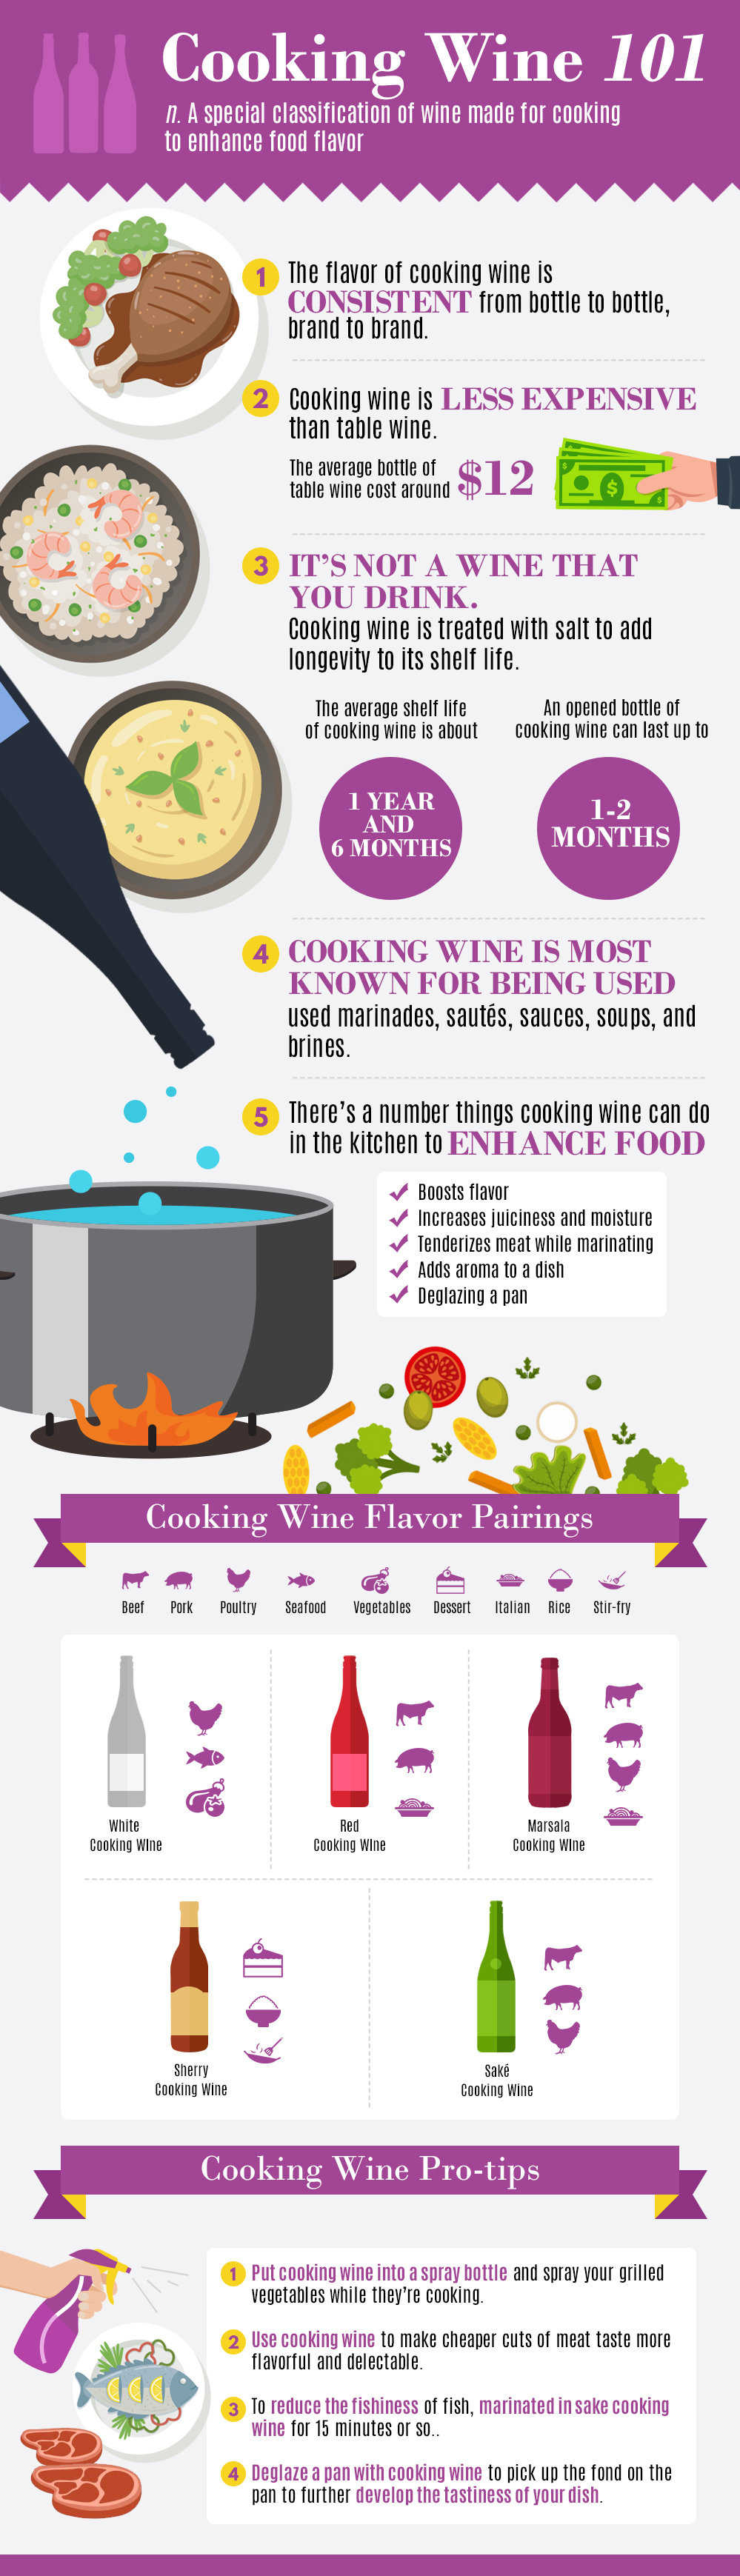 Cooking Wine 101 #infographic